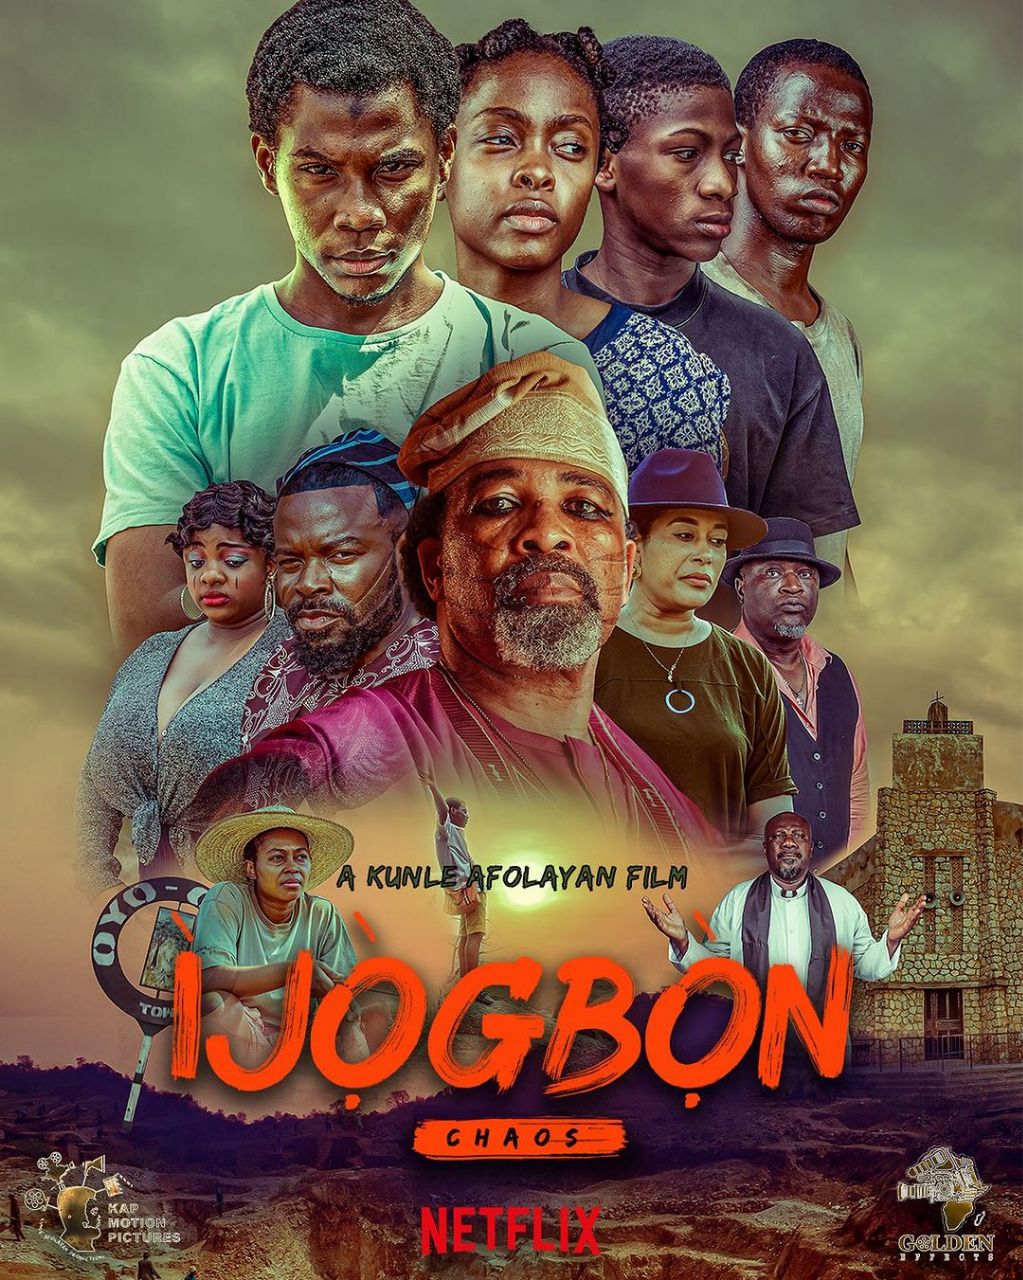 Check Out the Official Poster for Kunle Afolayan's Film "Ijogbon" |  BellaNaija